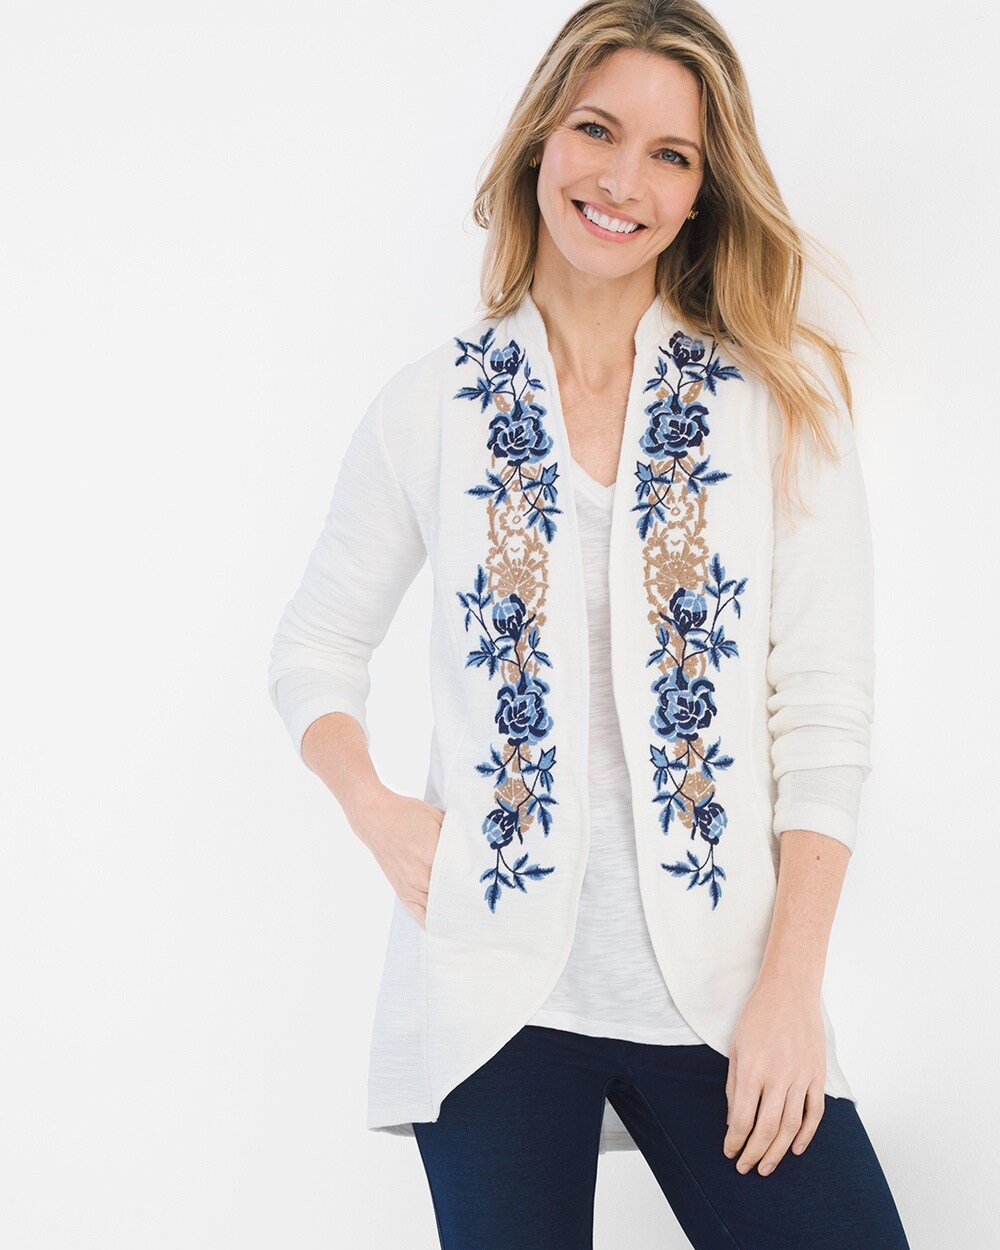 Zenergy Floral Embroidered Jacket